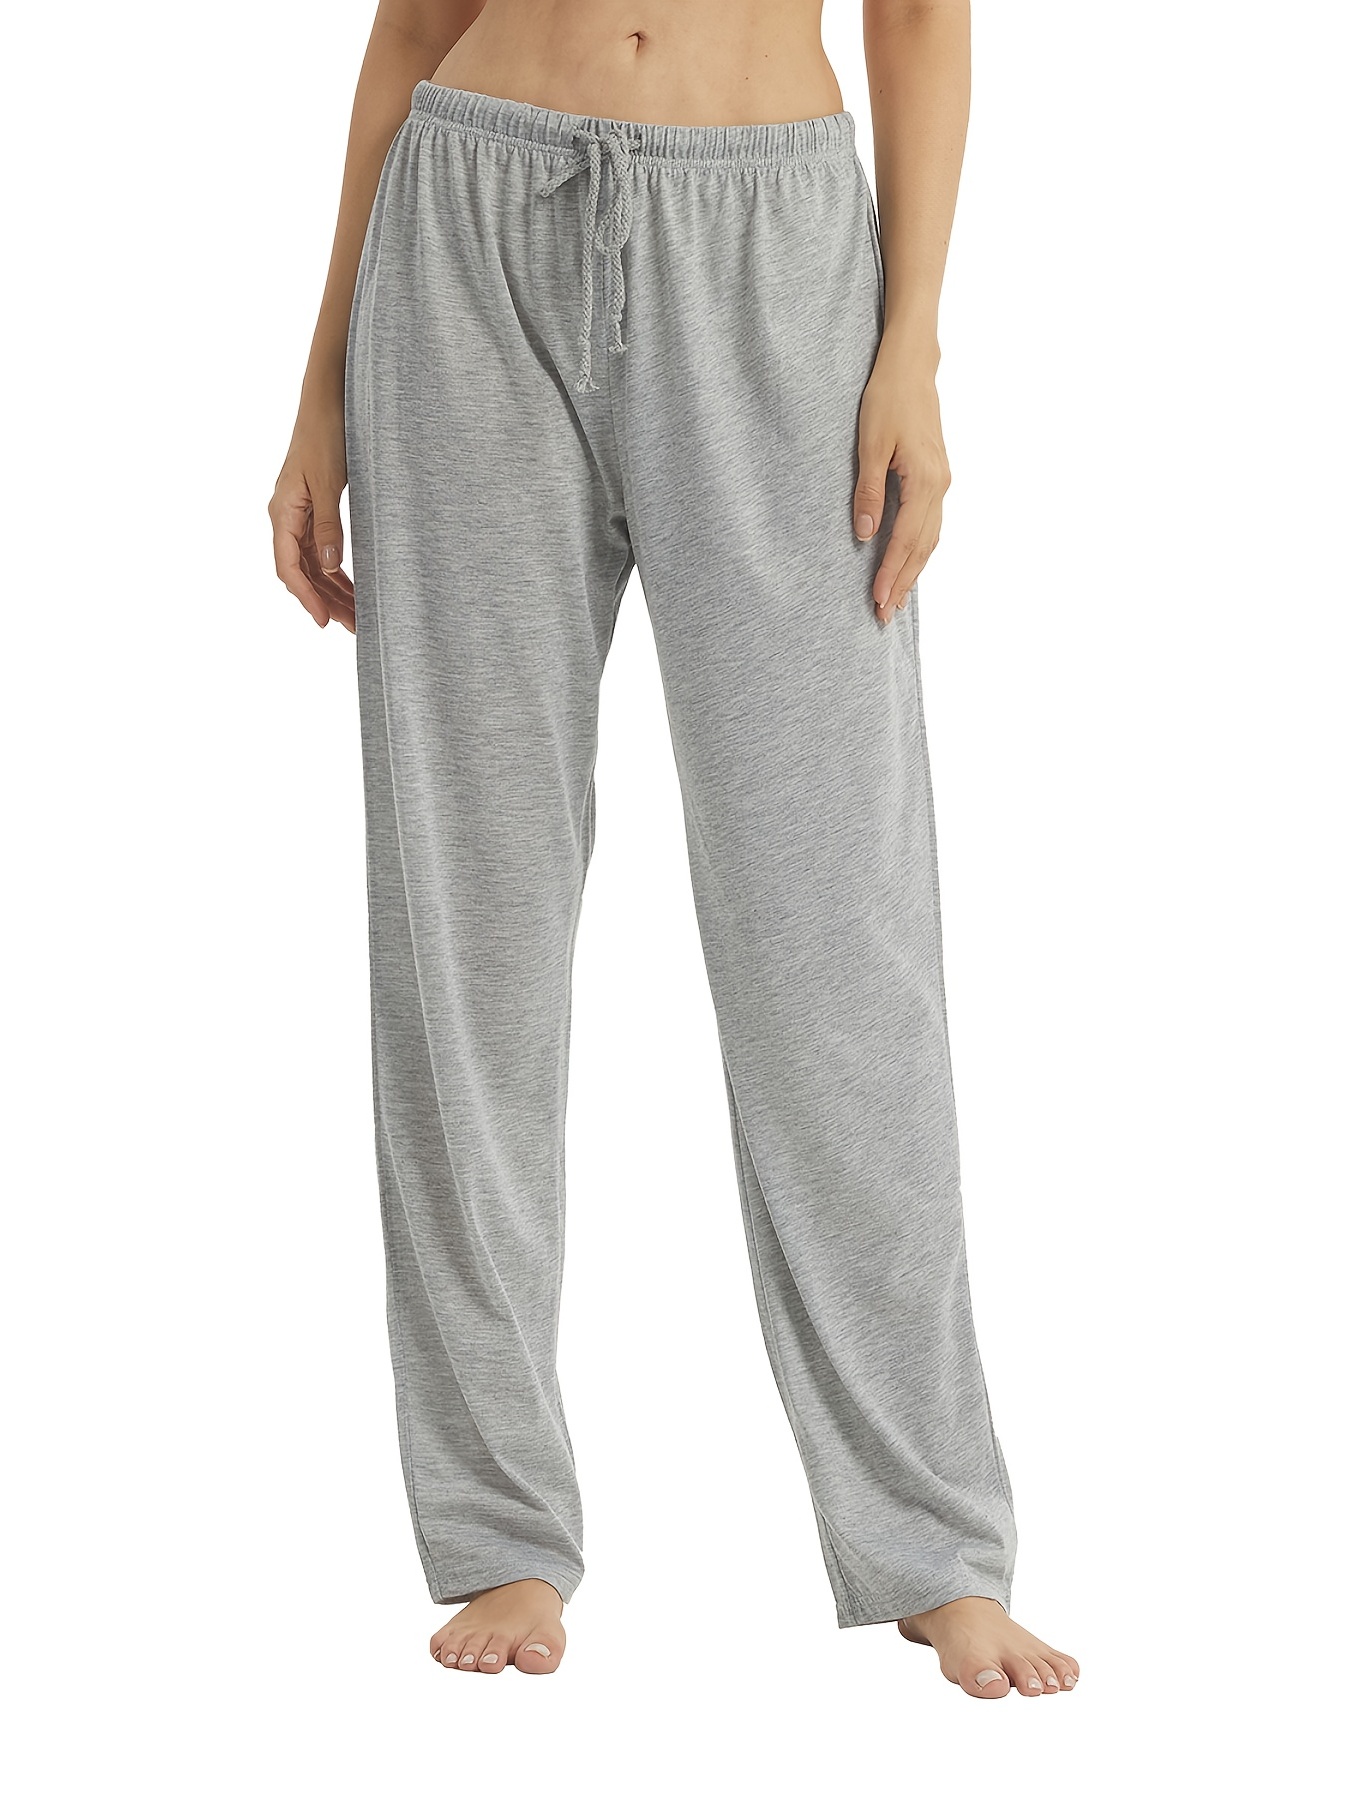 Buy Averno Women Grey Solid Cotton Casual Lounge Pant Or Payjama